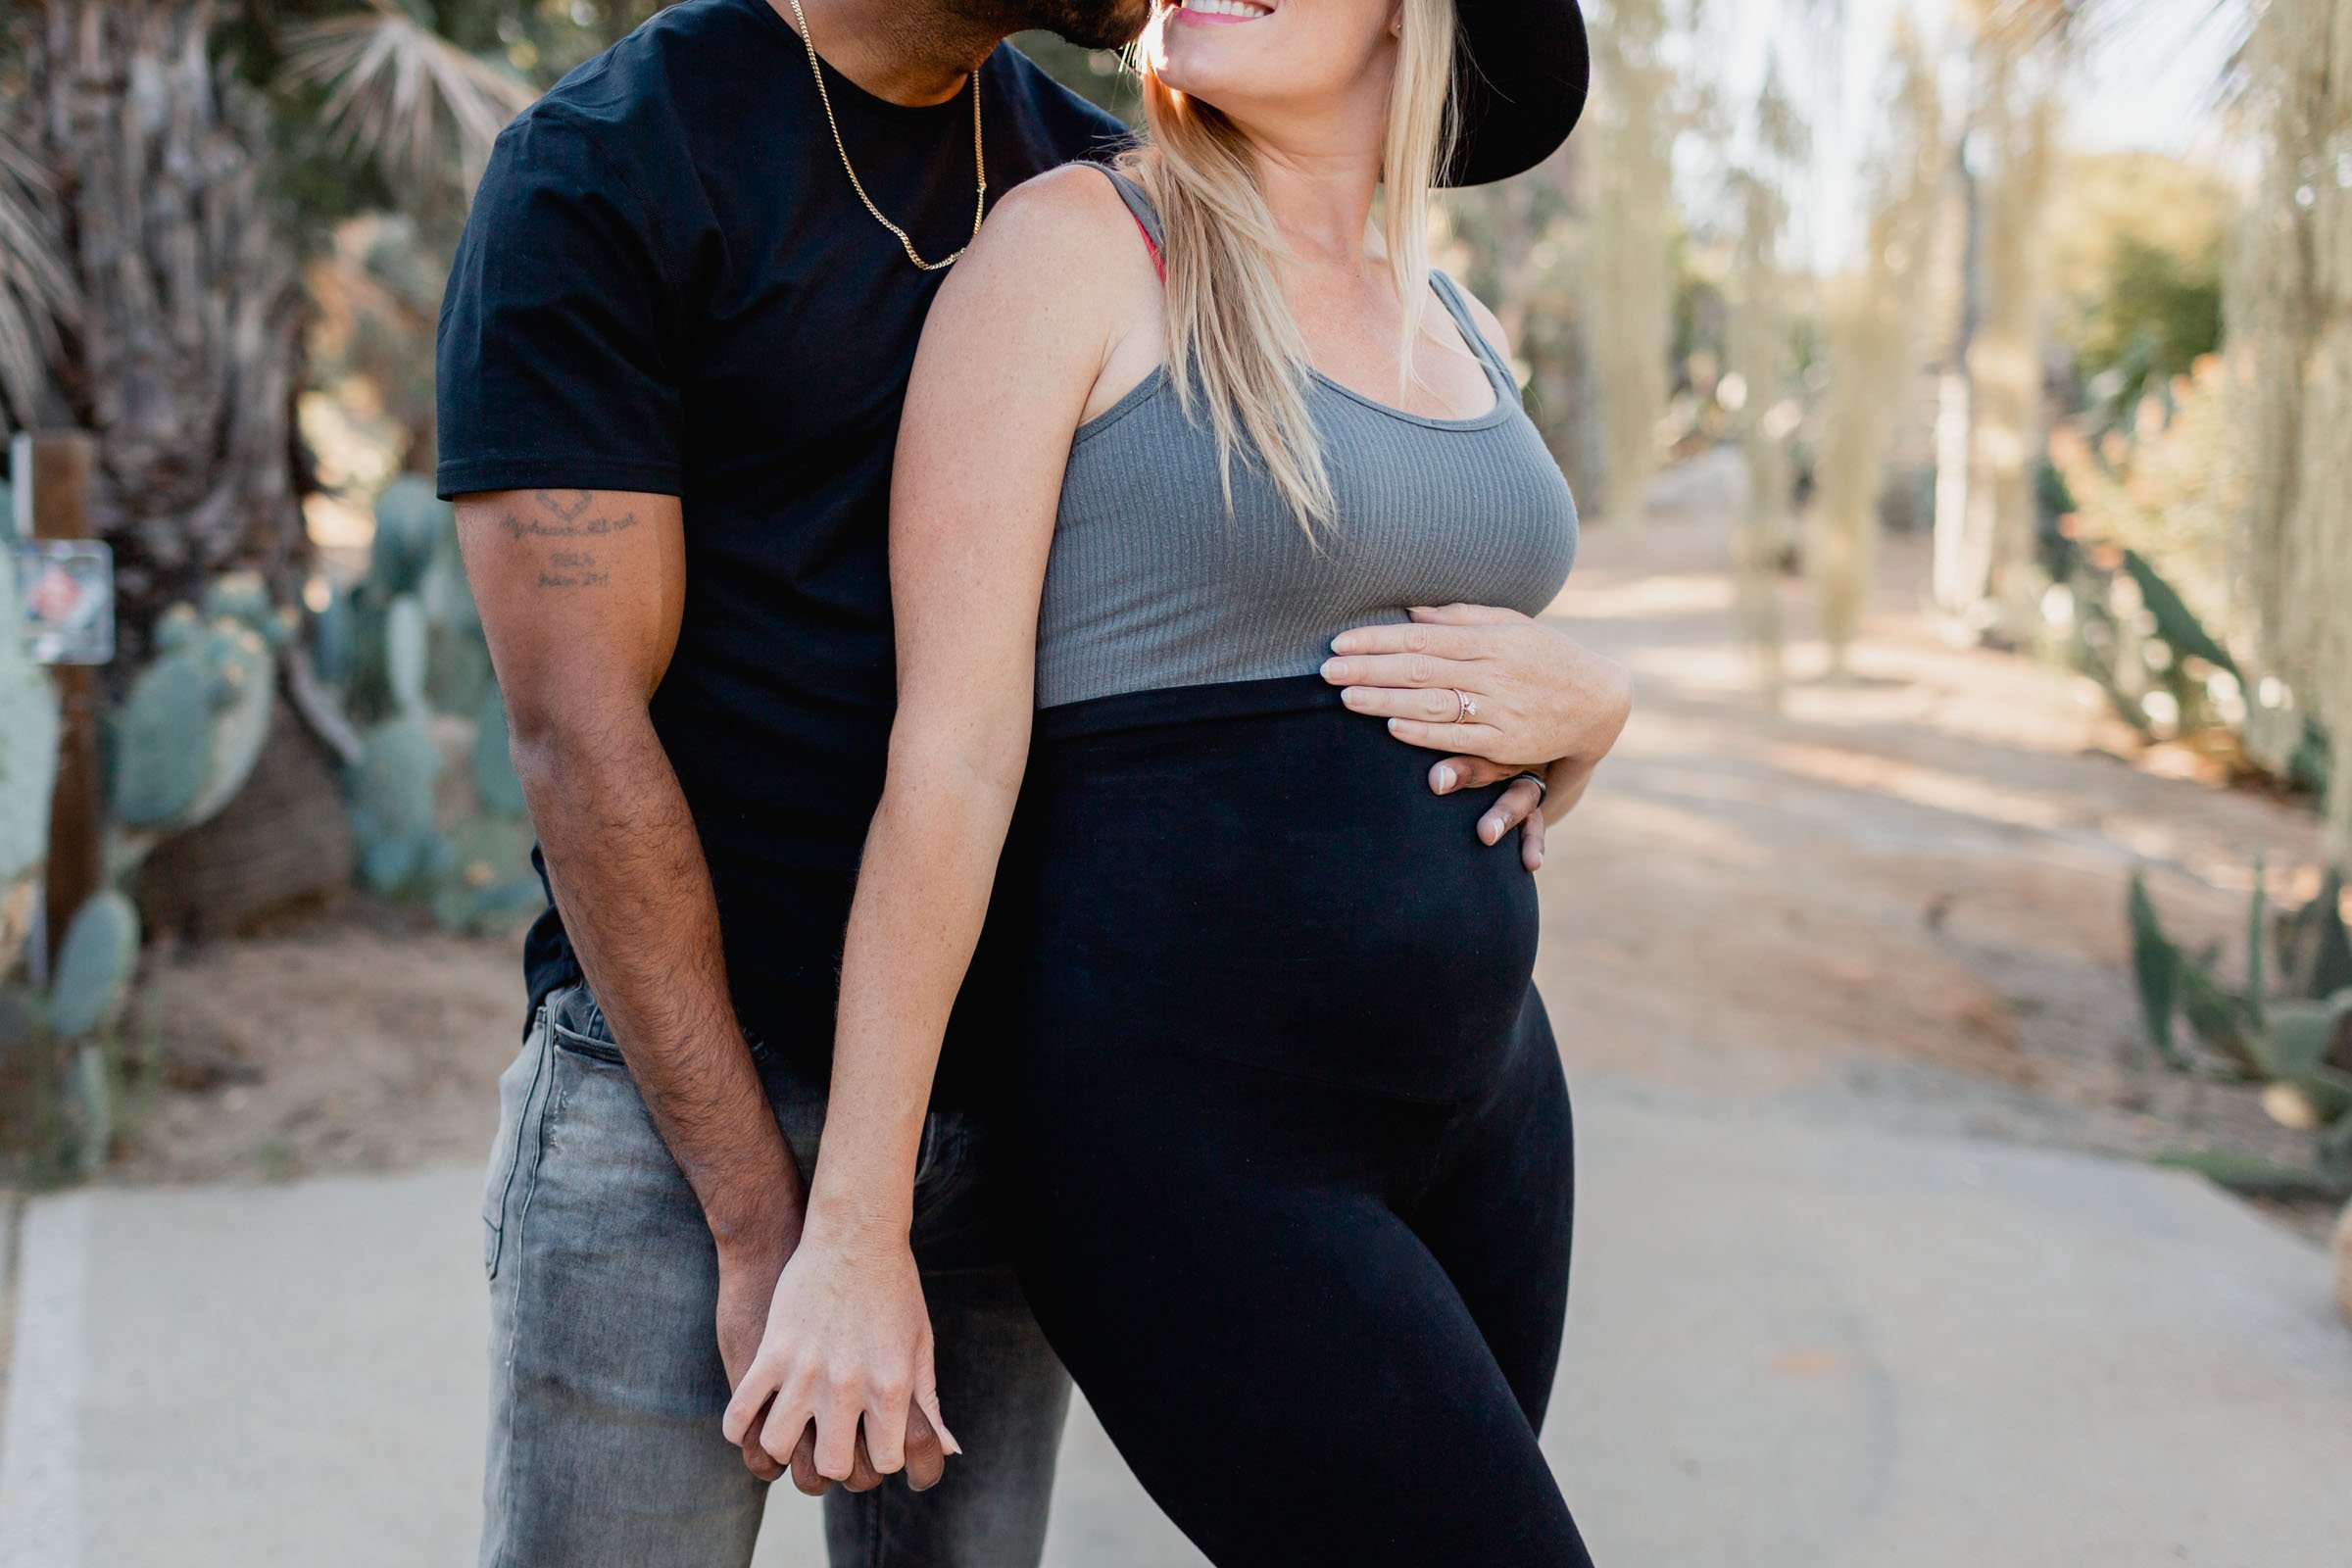 Pregnancy Announcement picture at Balboa park Desert Garden one of best san Diego locations for maternity photos as recommended by San Diego Maternity Photographer